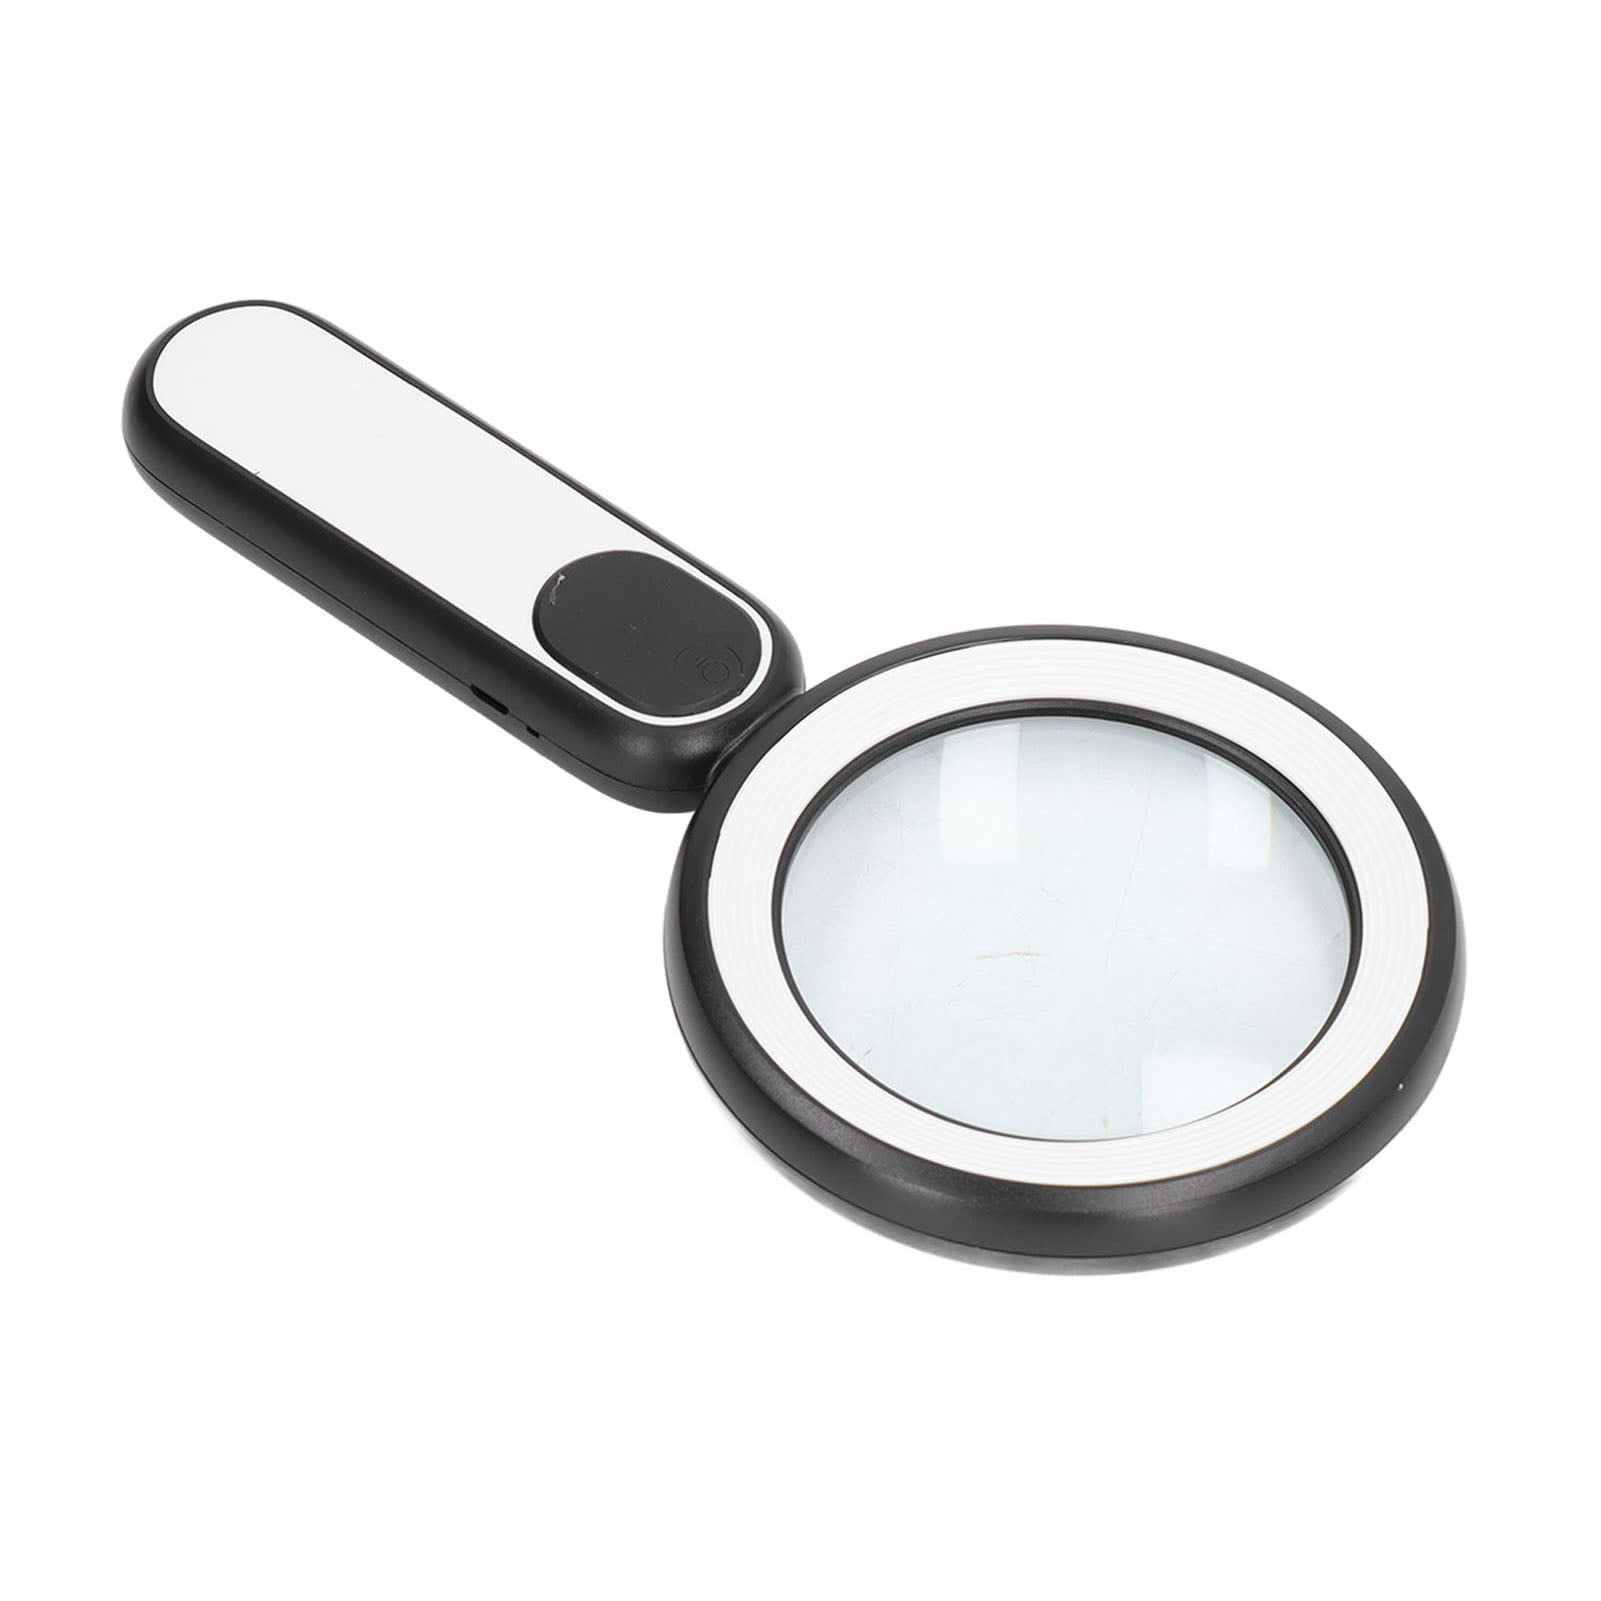 Reading magnifying glass - Stock Image - C034/7718 - Science Photo Library